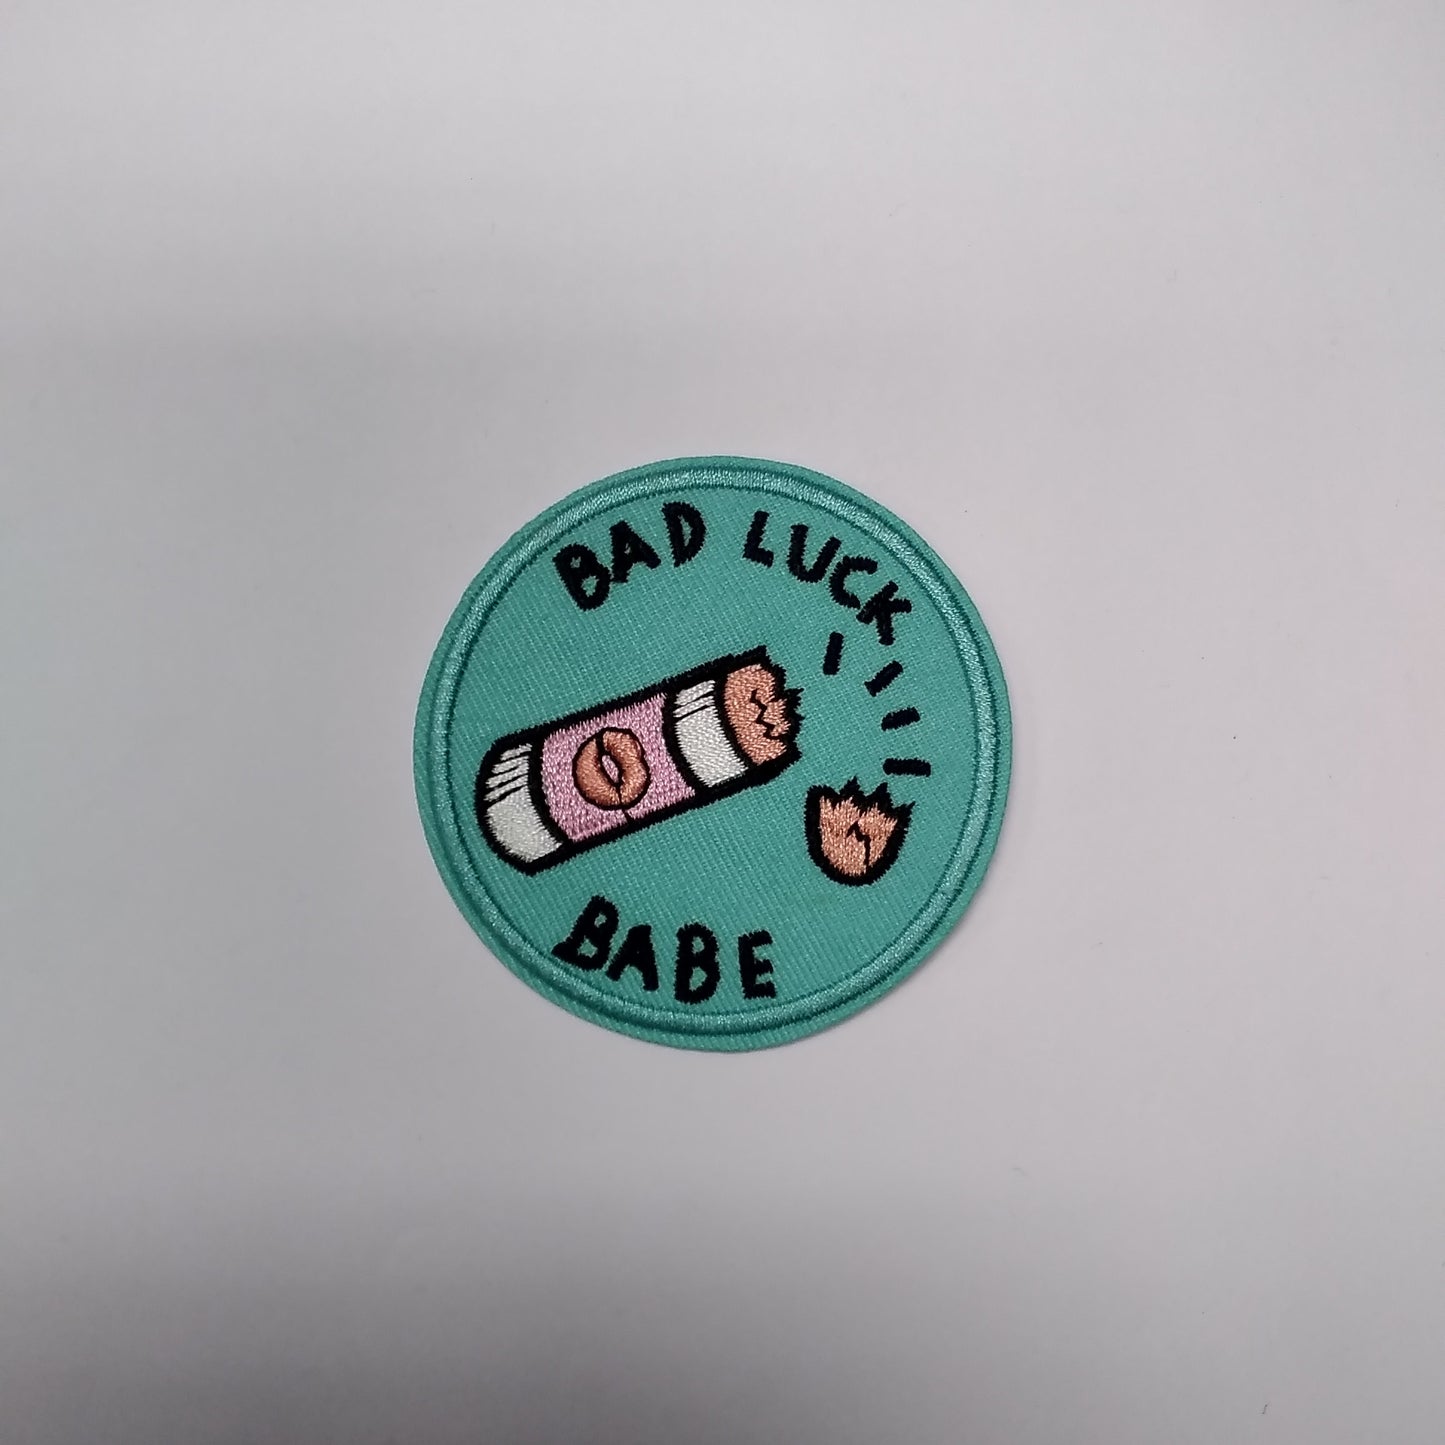 Bad Luck Babe Patch